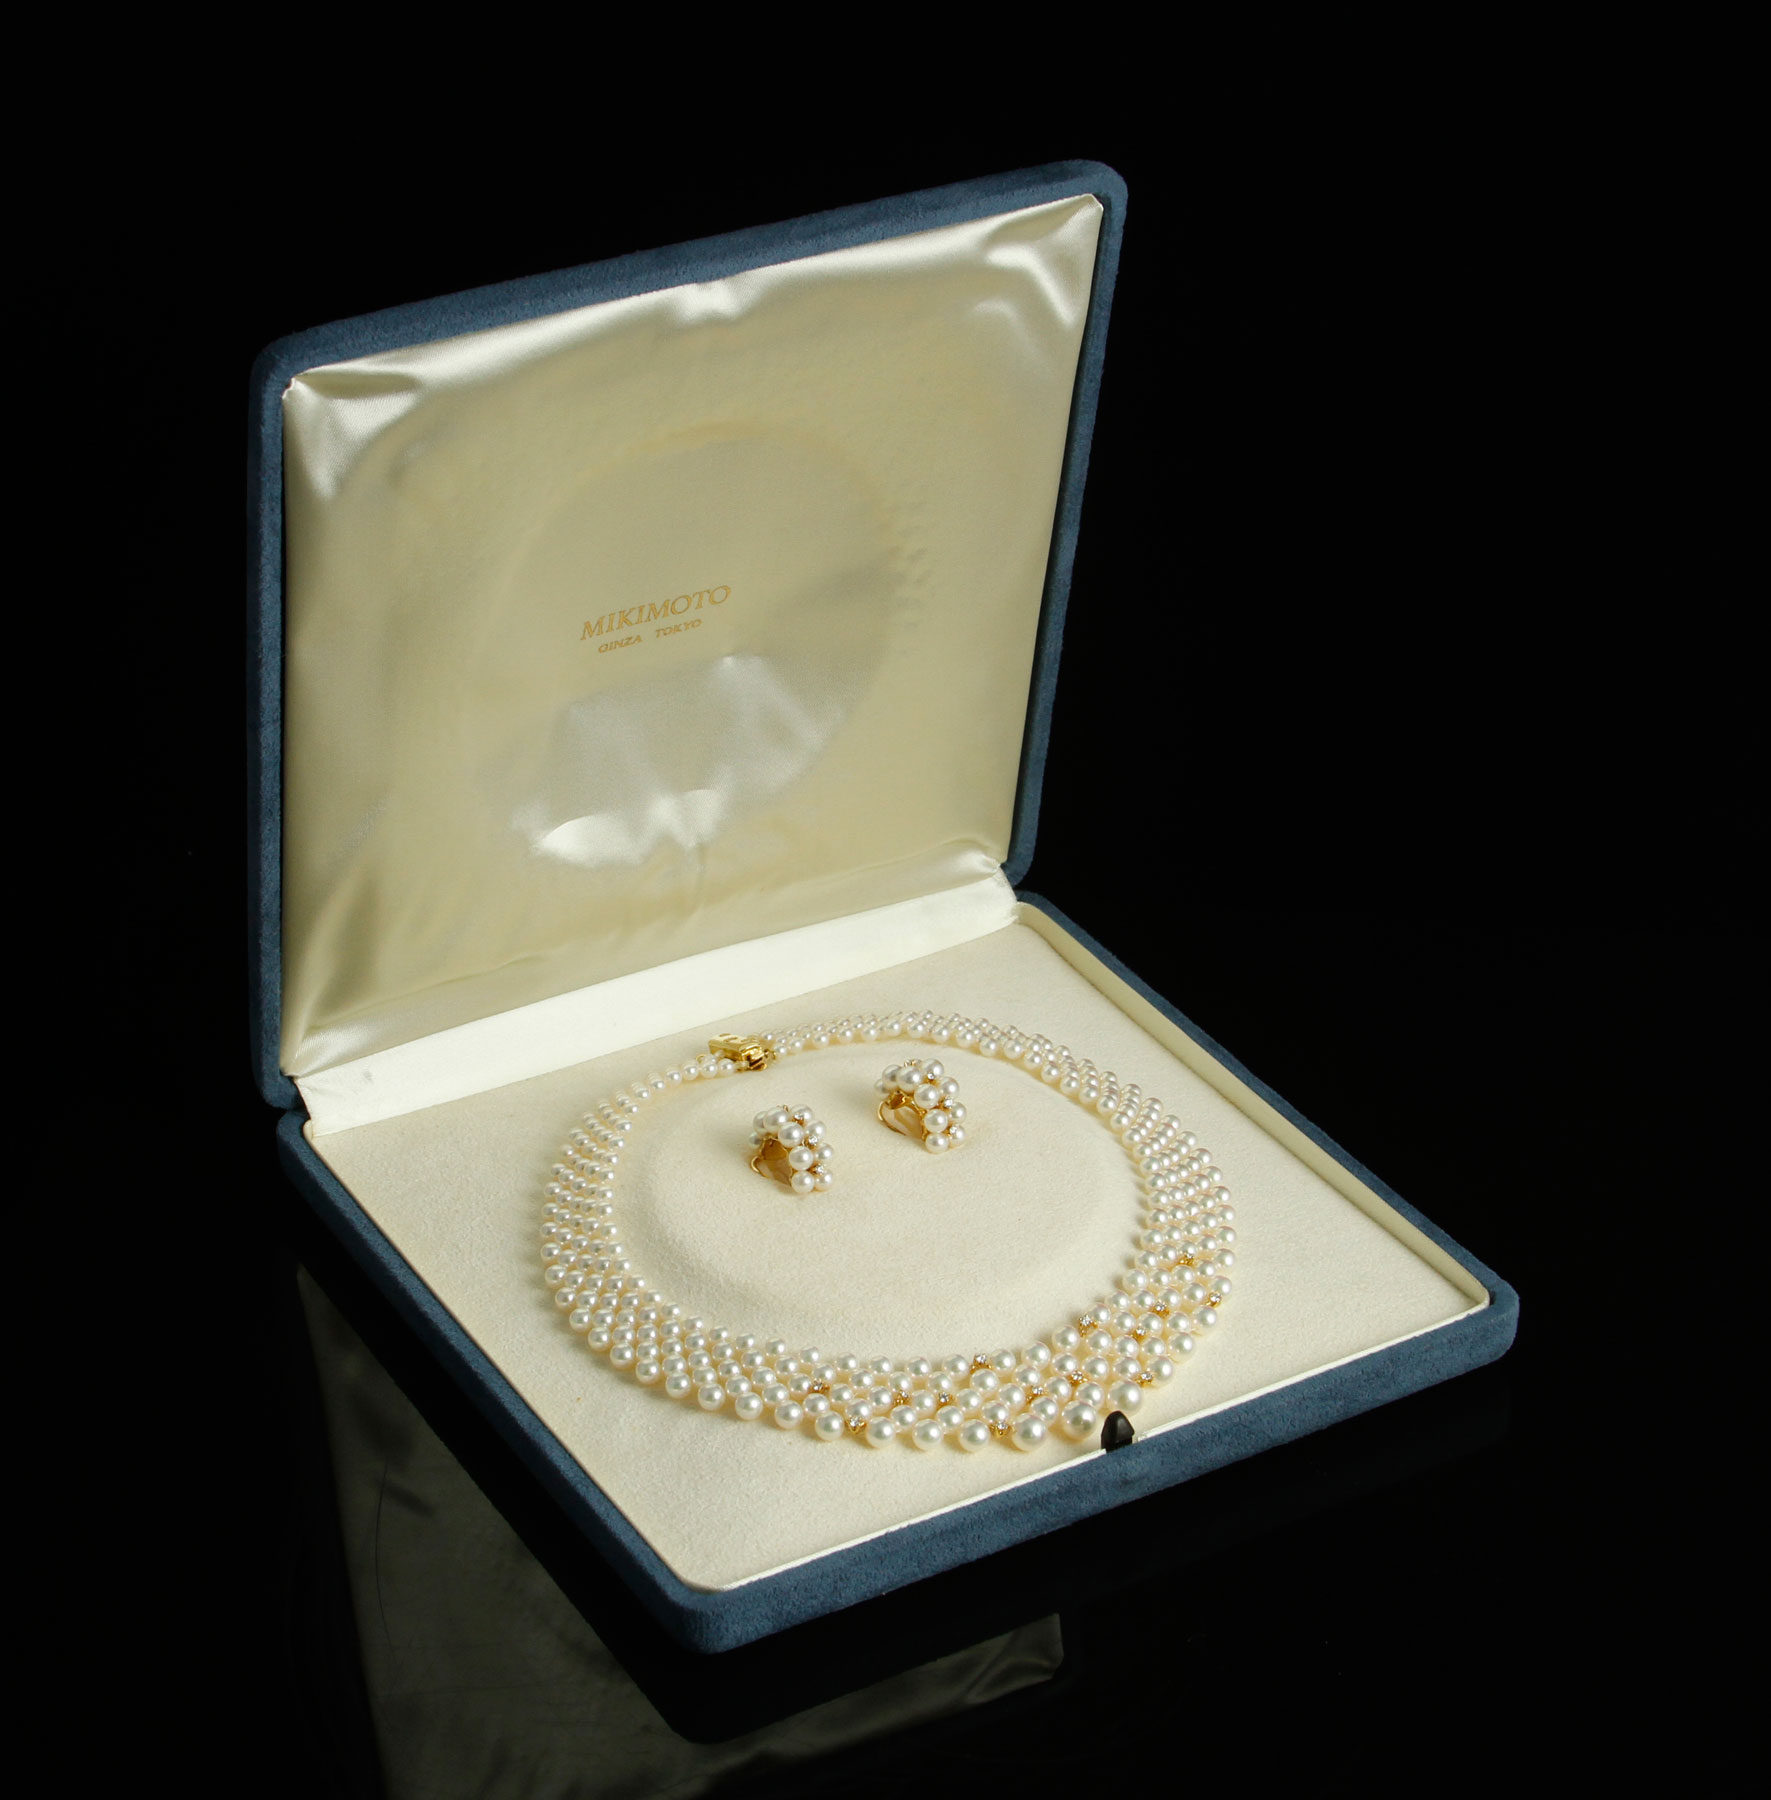 Mikimoto 18K Akoya Pearl Necklace and Earrings